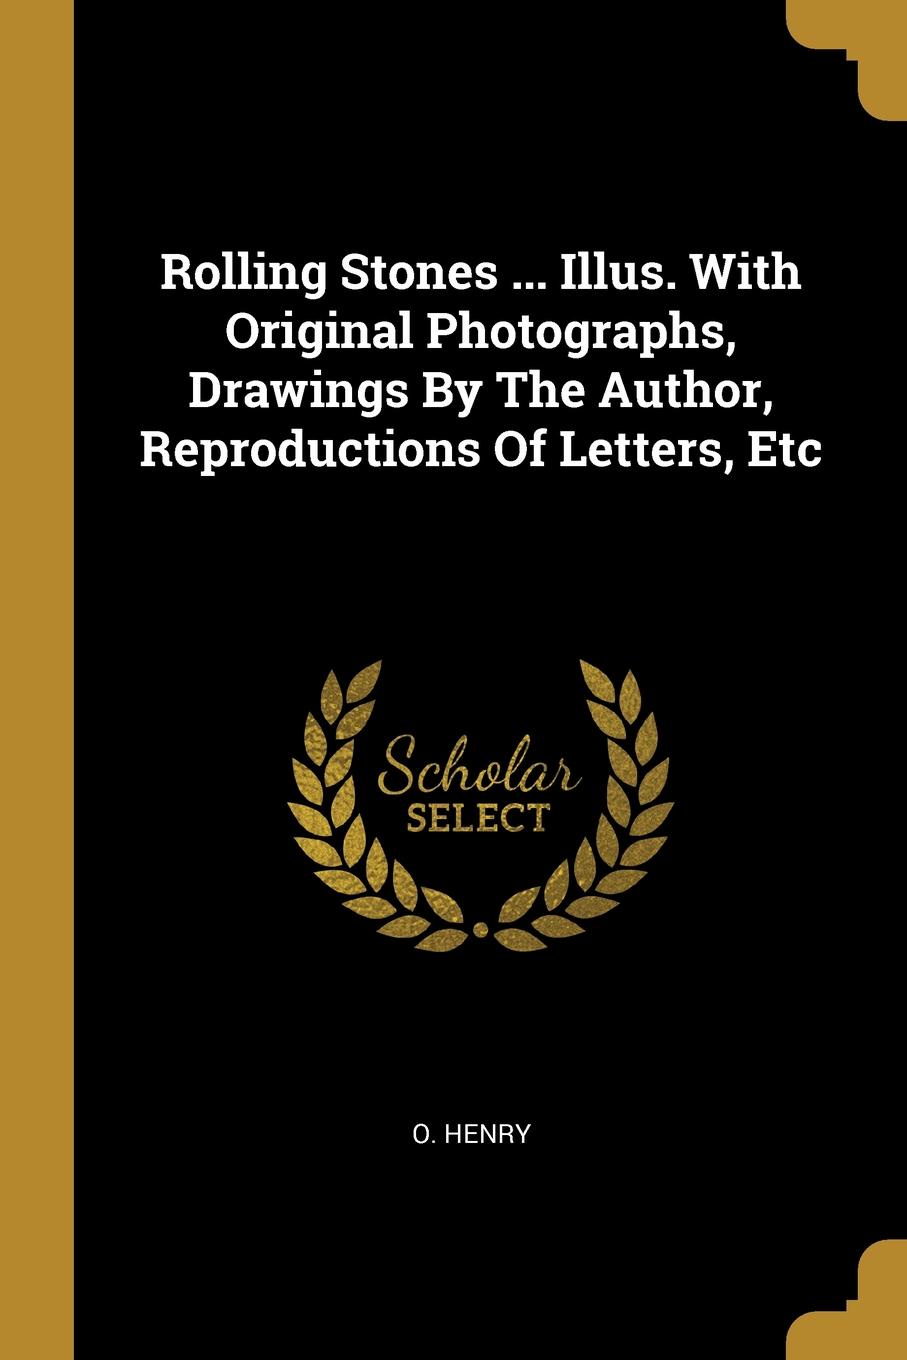 Rolling Stones ... Illus. With Original Photographs, Drawings By The Author, Reproductions Of Letters, Etc